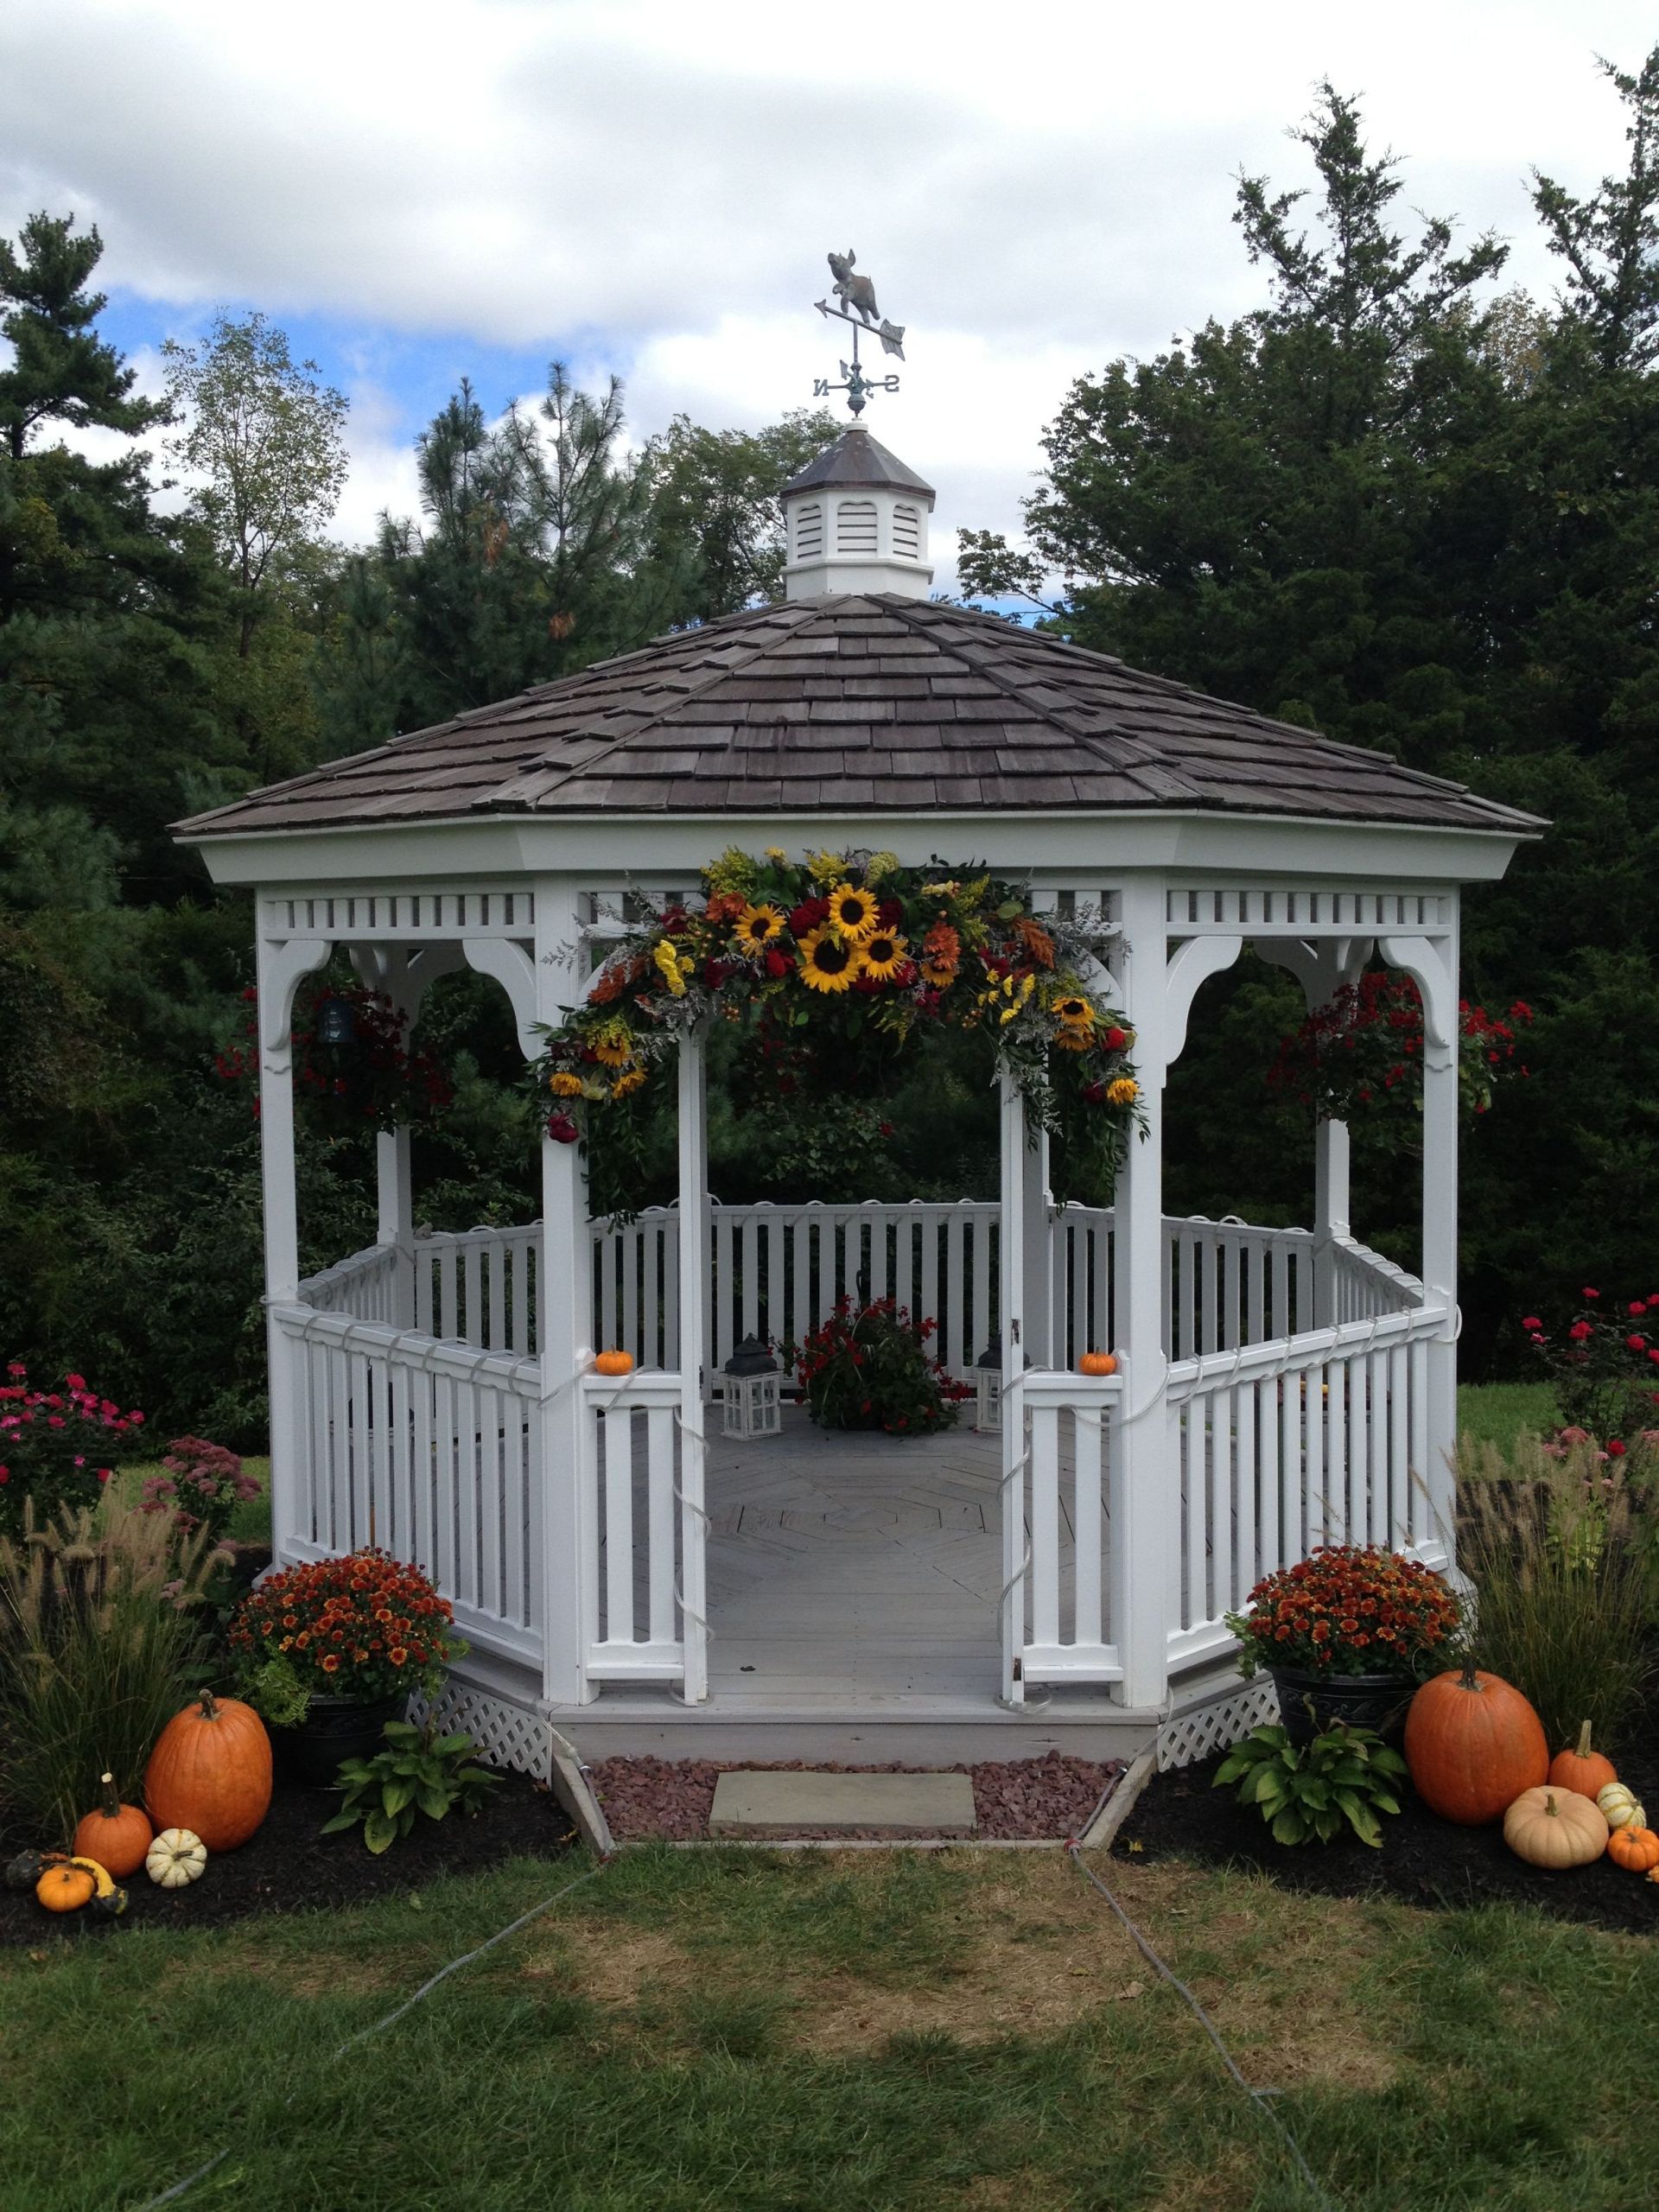 How To Decorate A Gazebo For A Wedding
 Decorated Gazebo for a Fall Wedding from the Garden Path